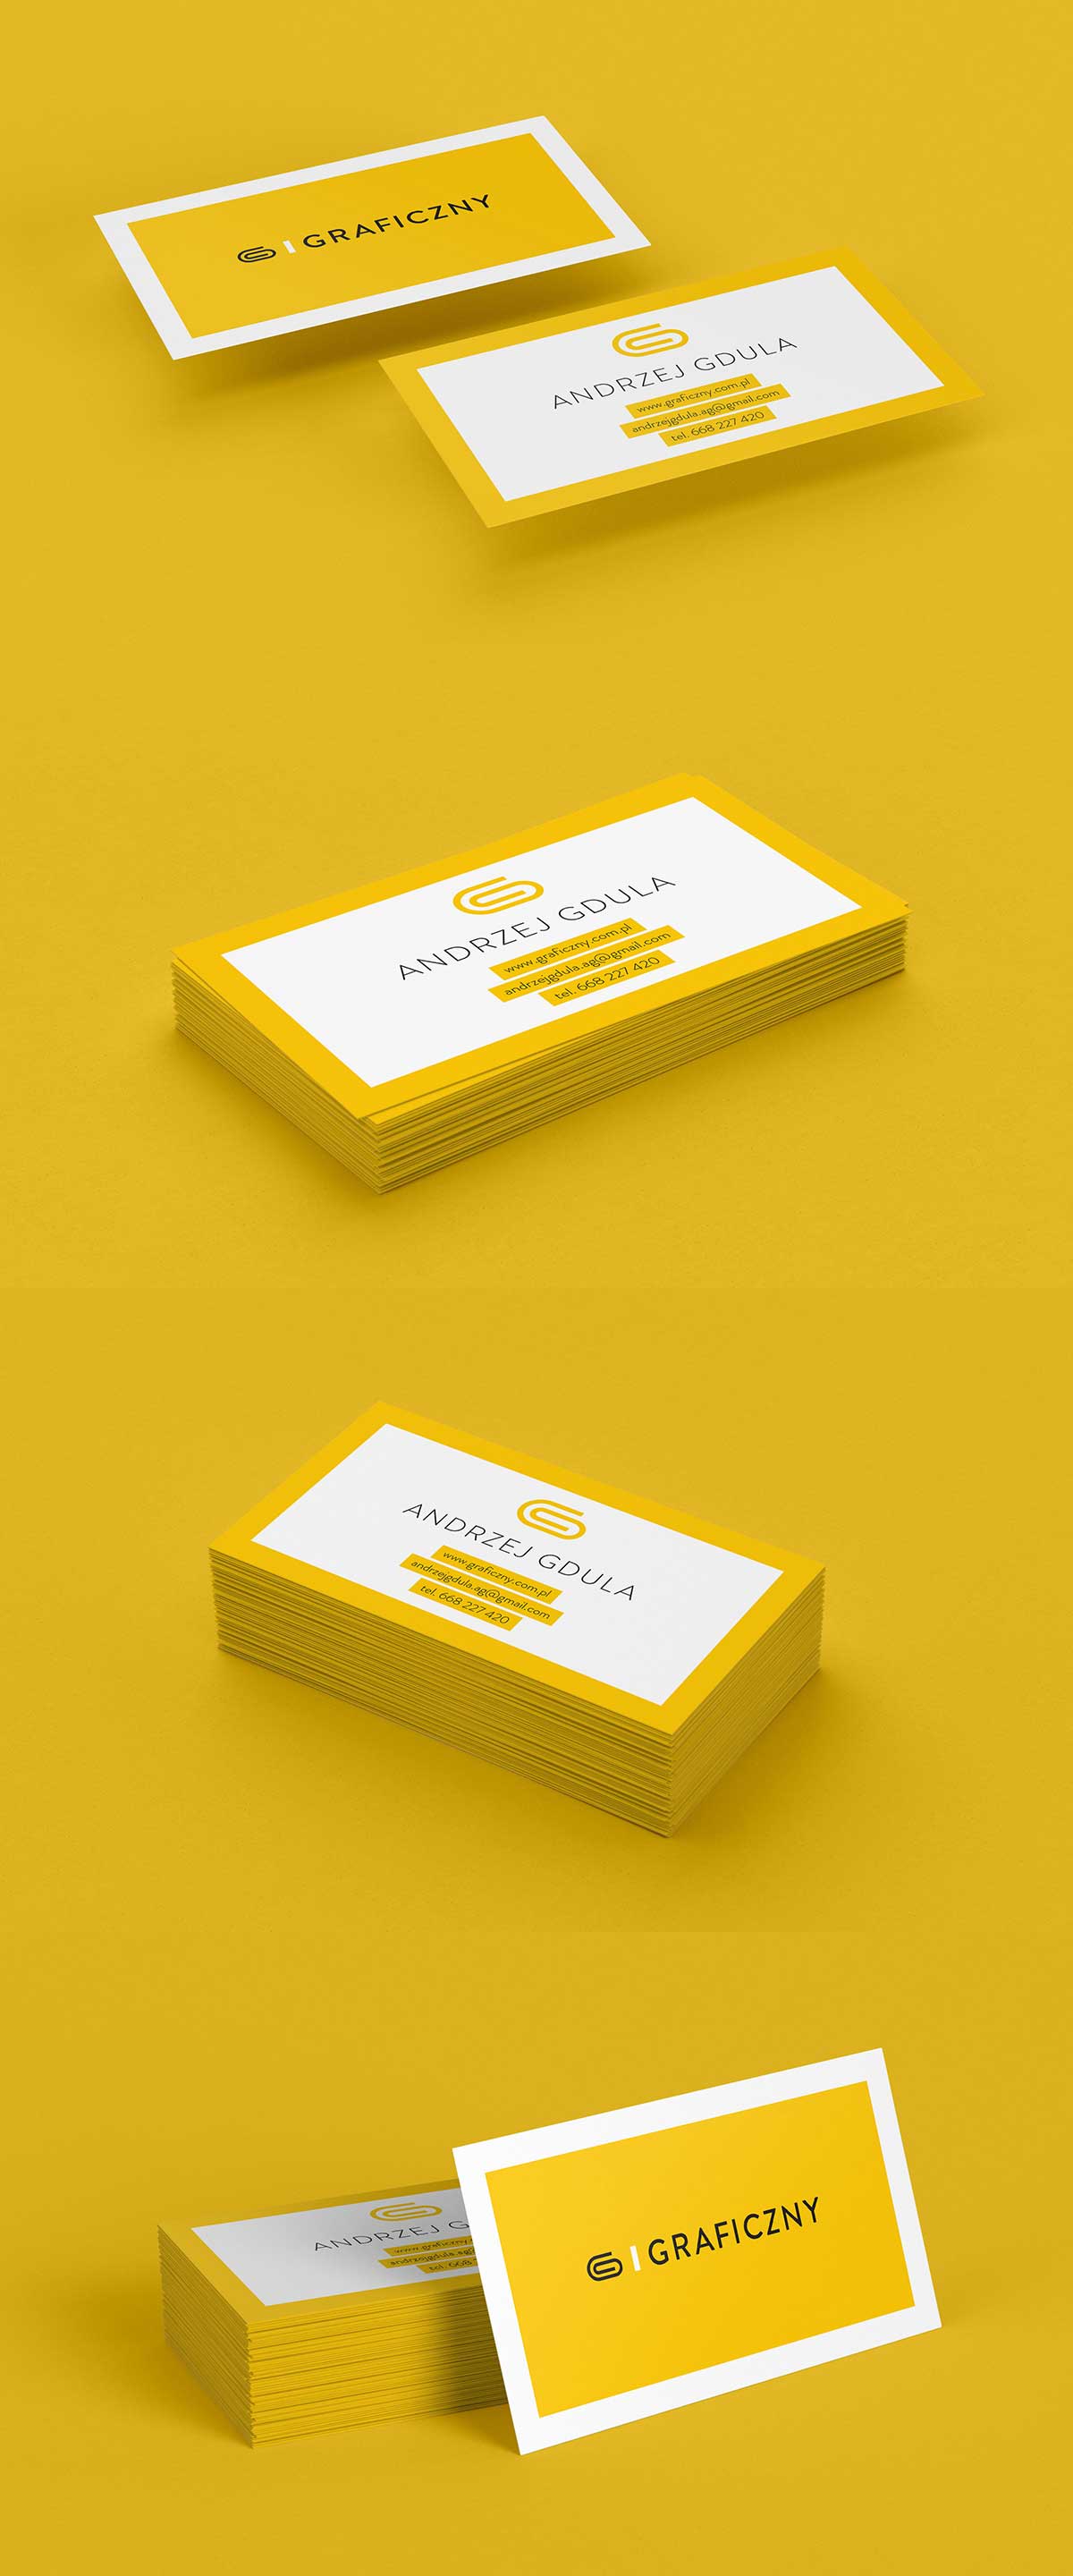 Free-Business-cards-mockup-PSD